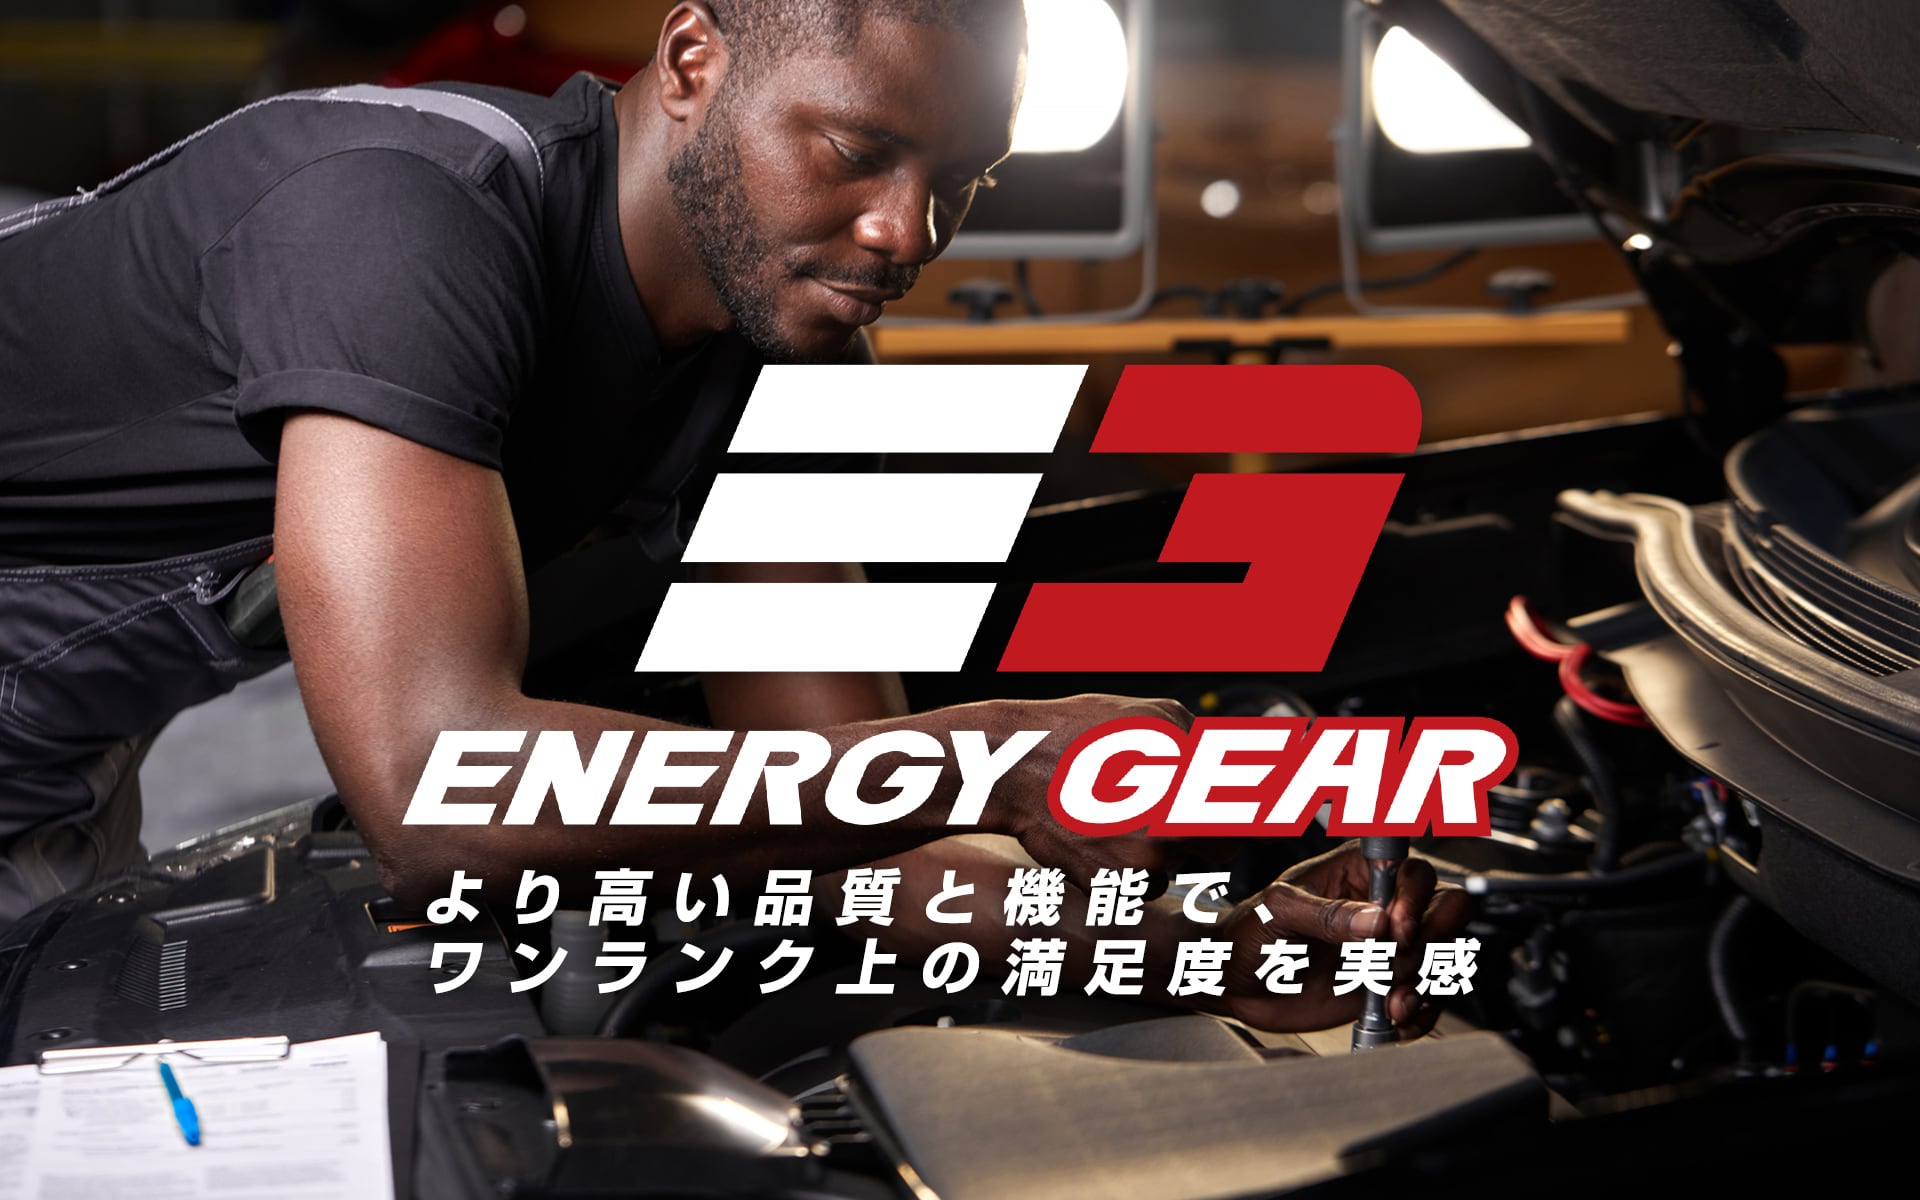 ENERGY GEAR（エナギーギア）